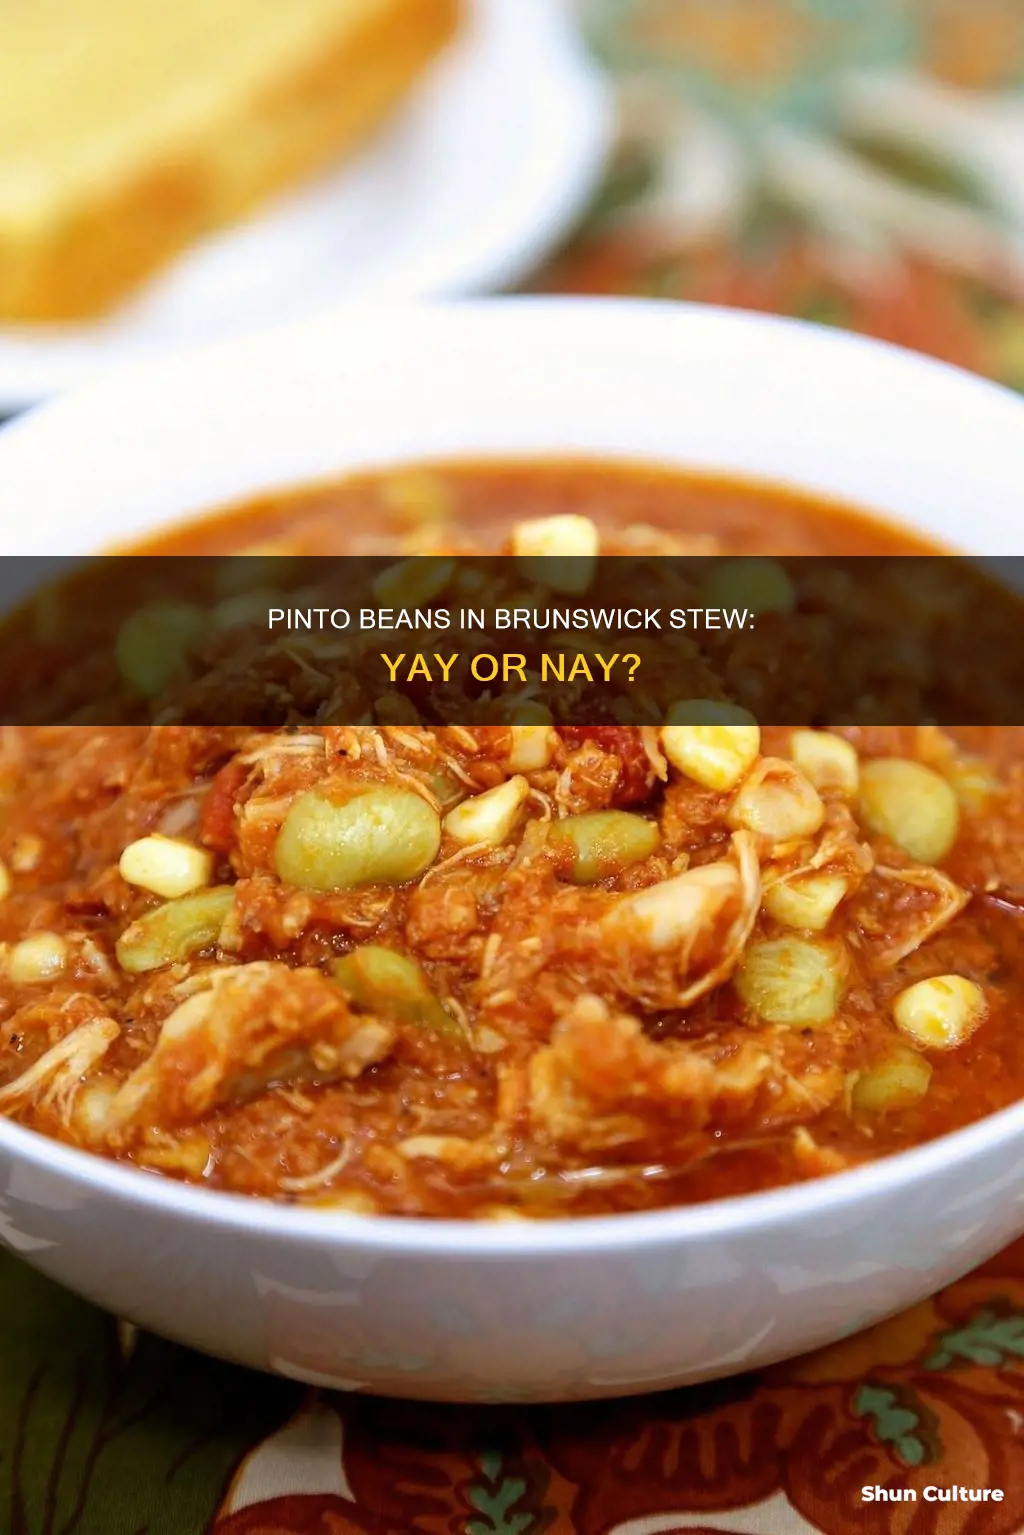 can you use pinto beans in brunswick stew